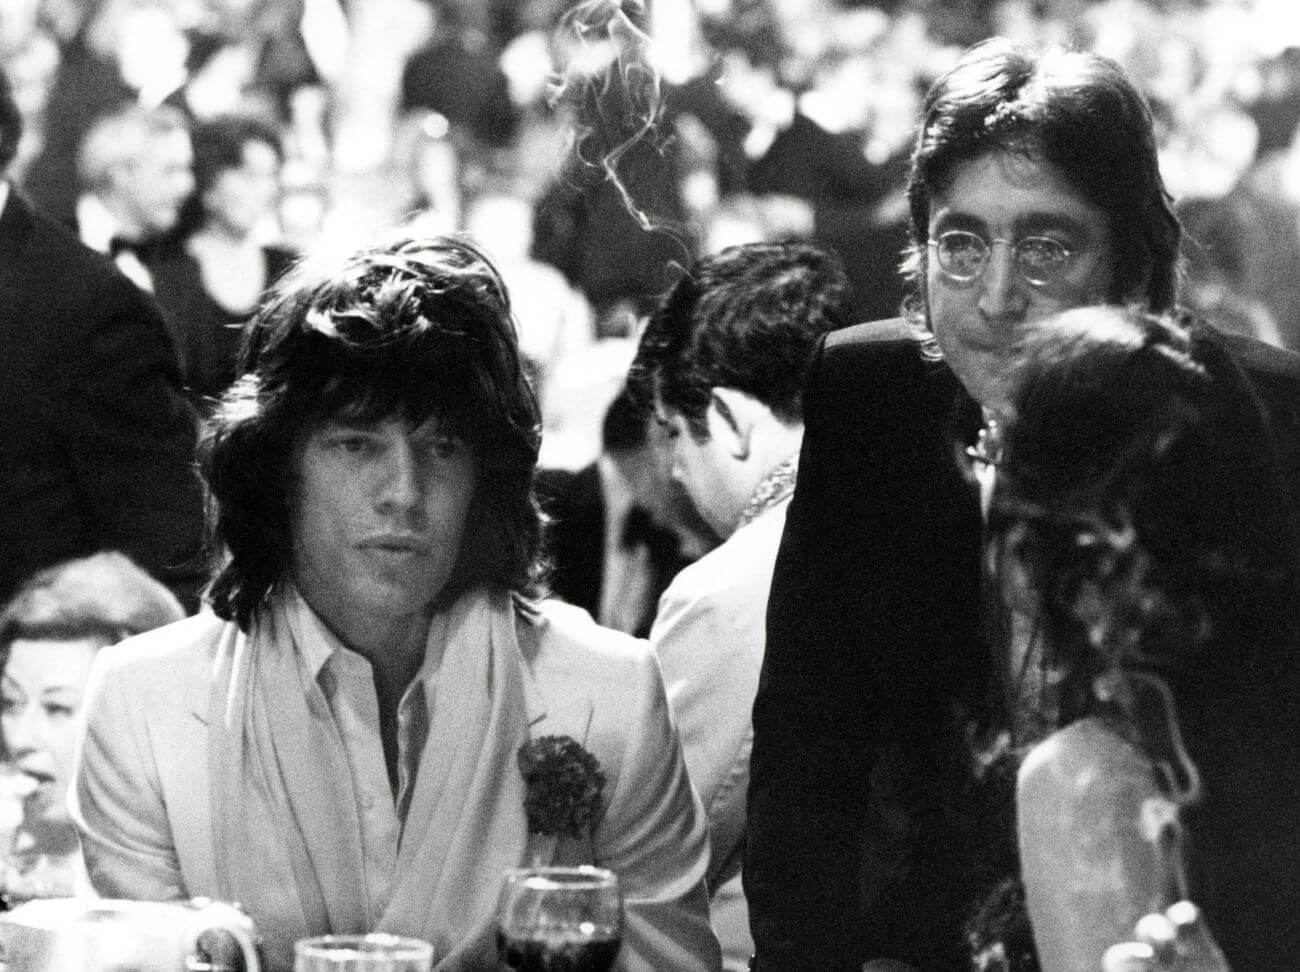 A black and white picture of Mick Jagger and John Lennon sitting next to each other in a crowded room.